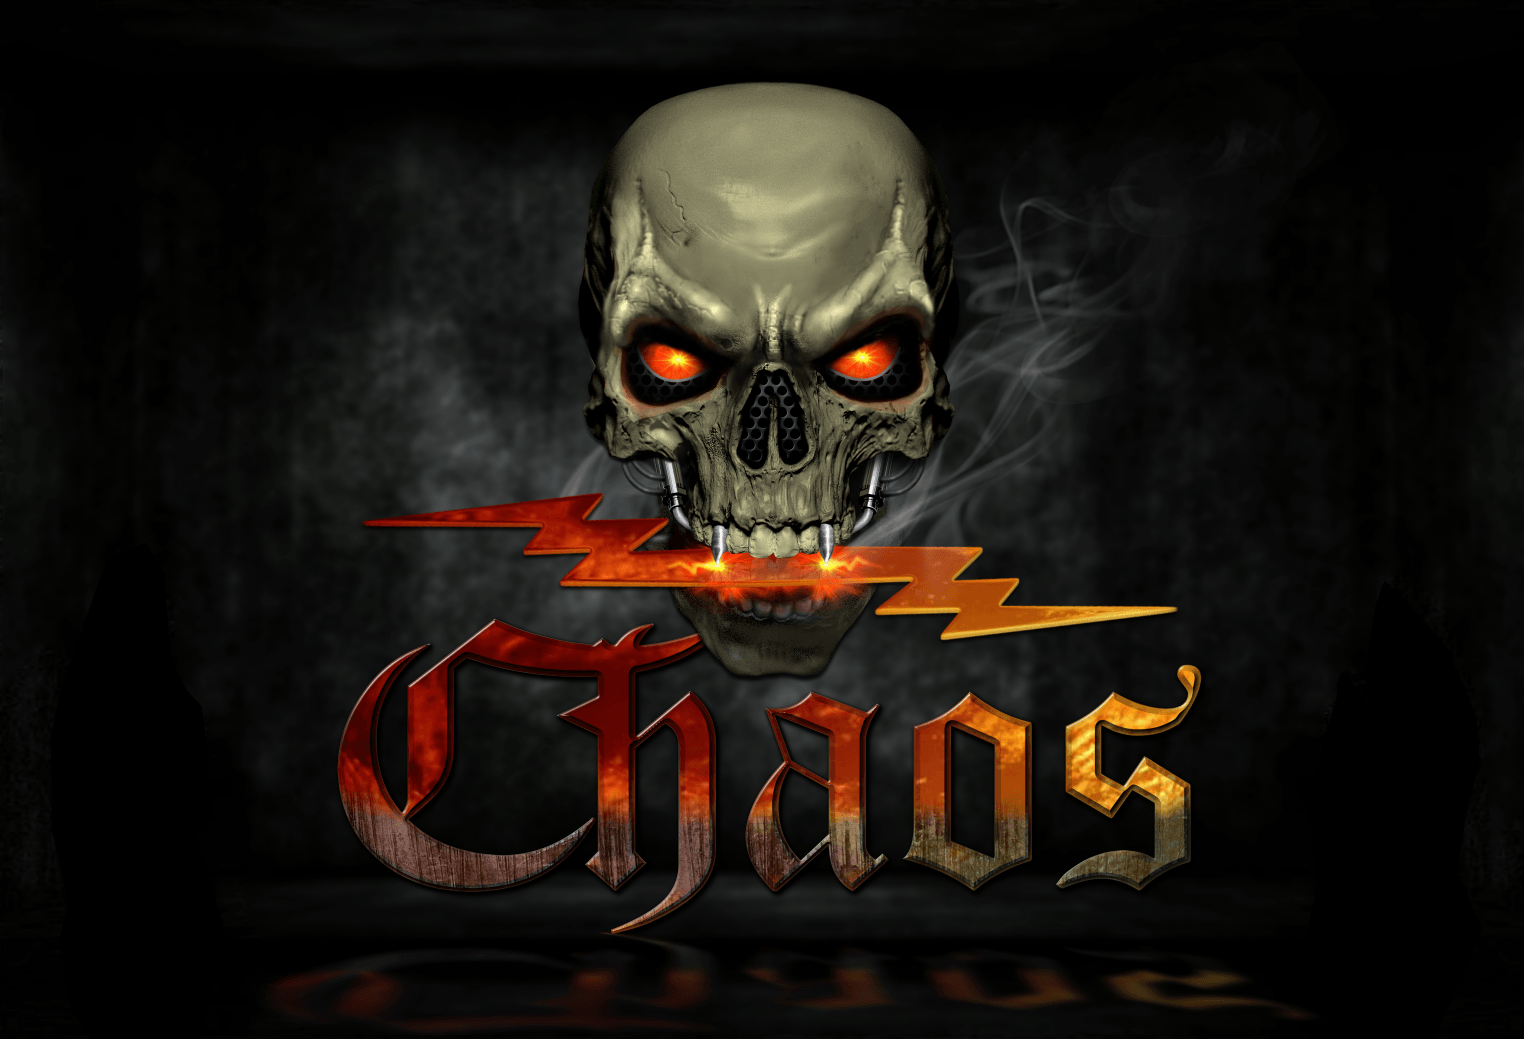 Chaos Logo - Greg Joins Chaos – Shocks All With New Logo! – Chaotic Dreams